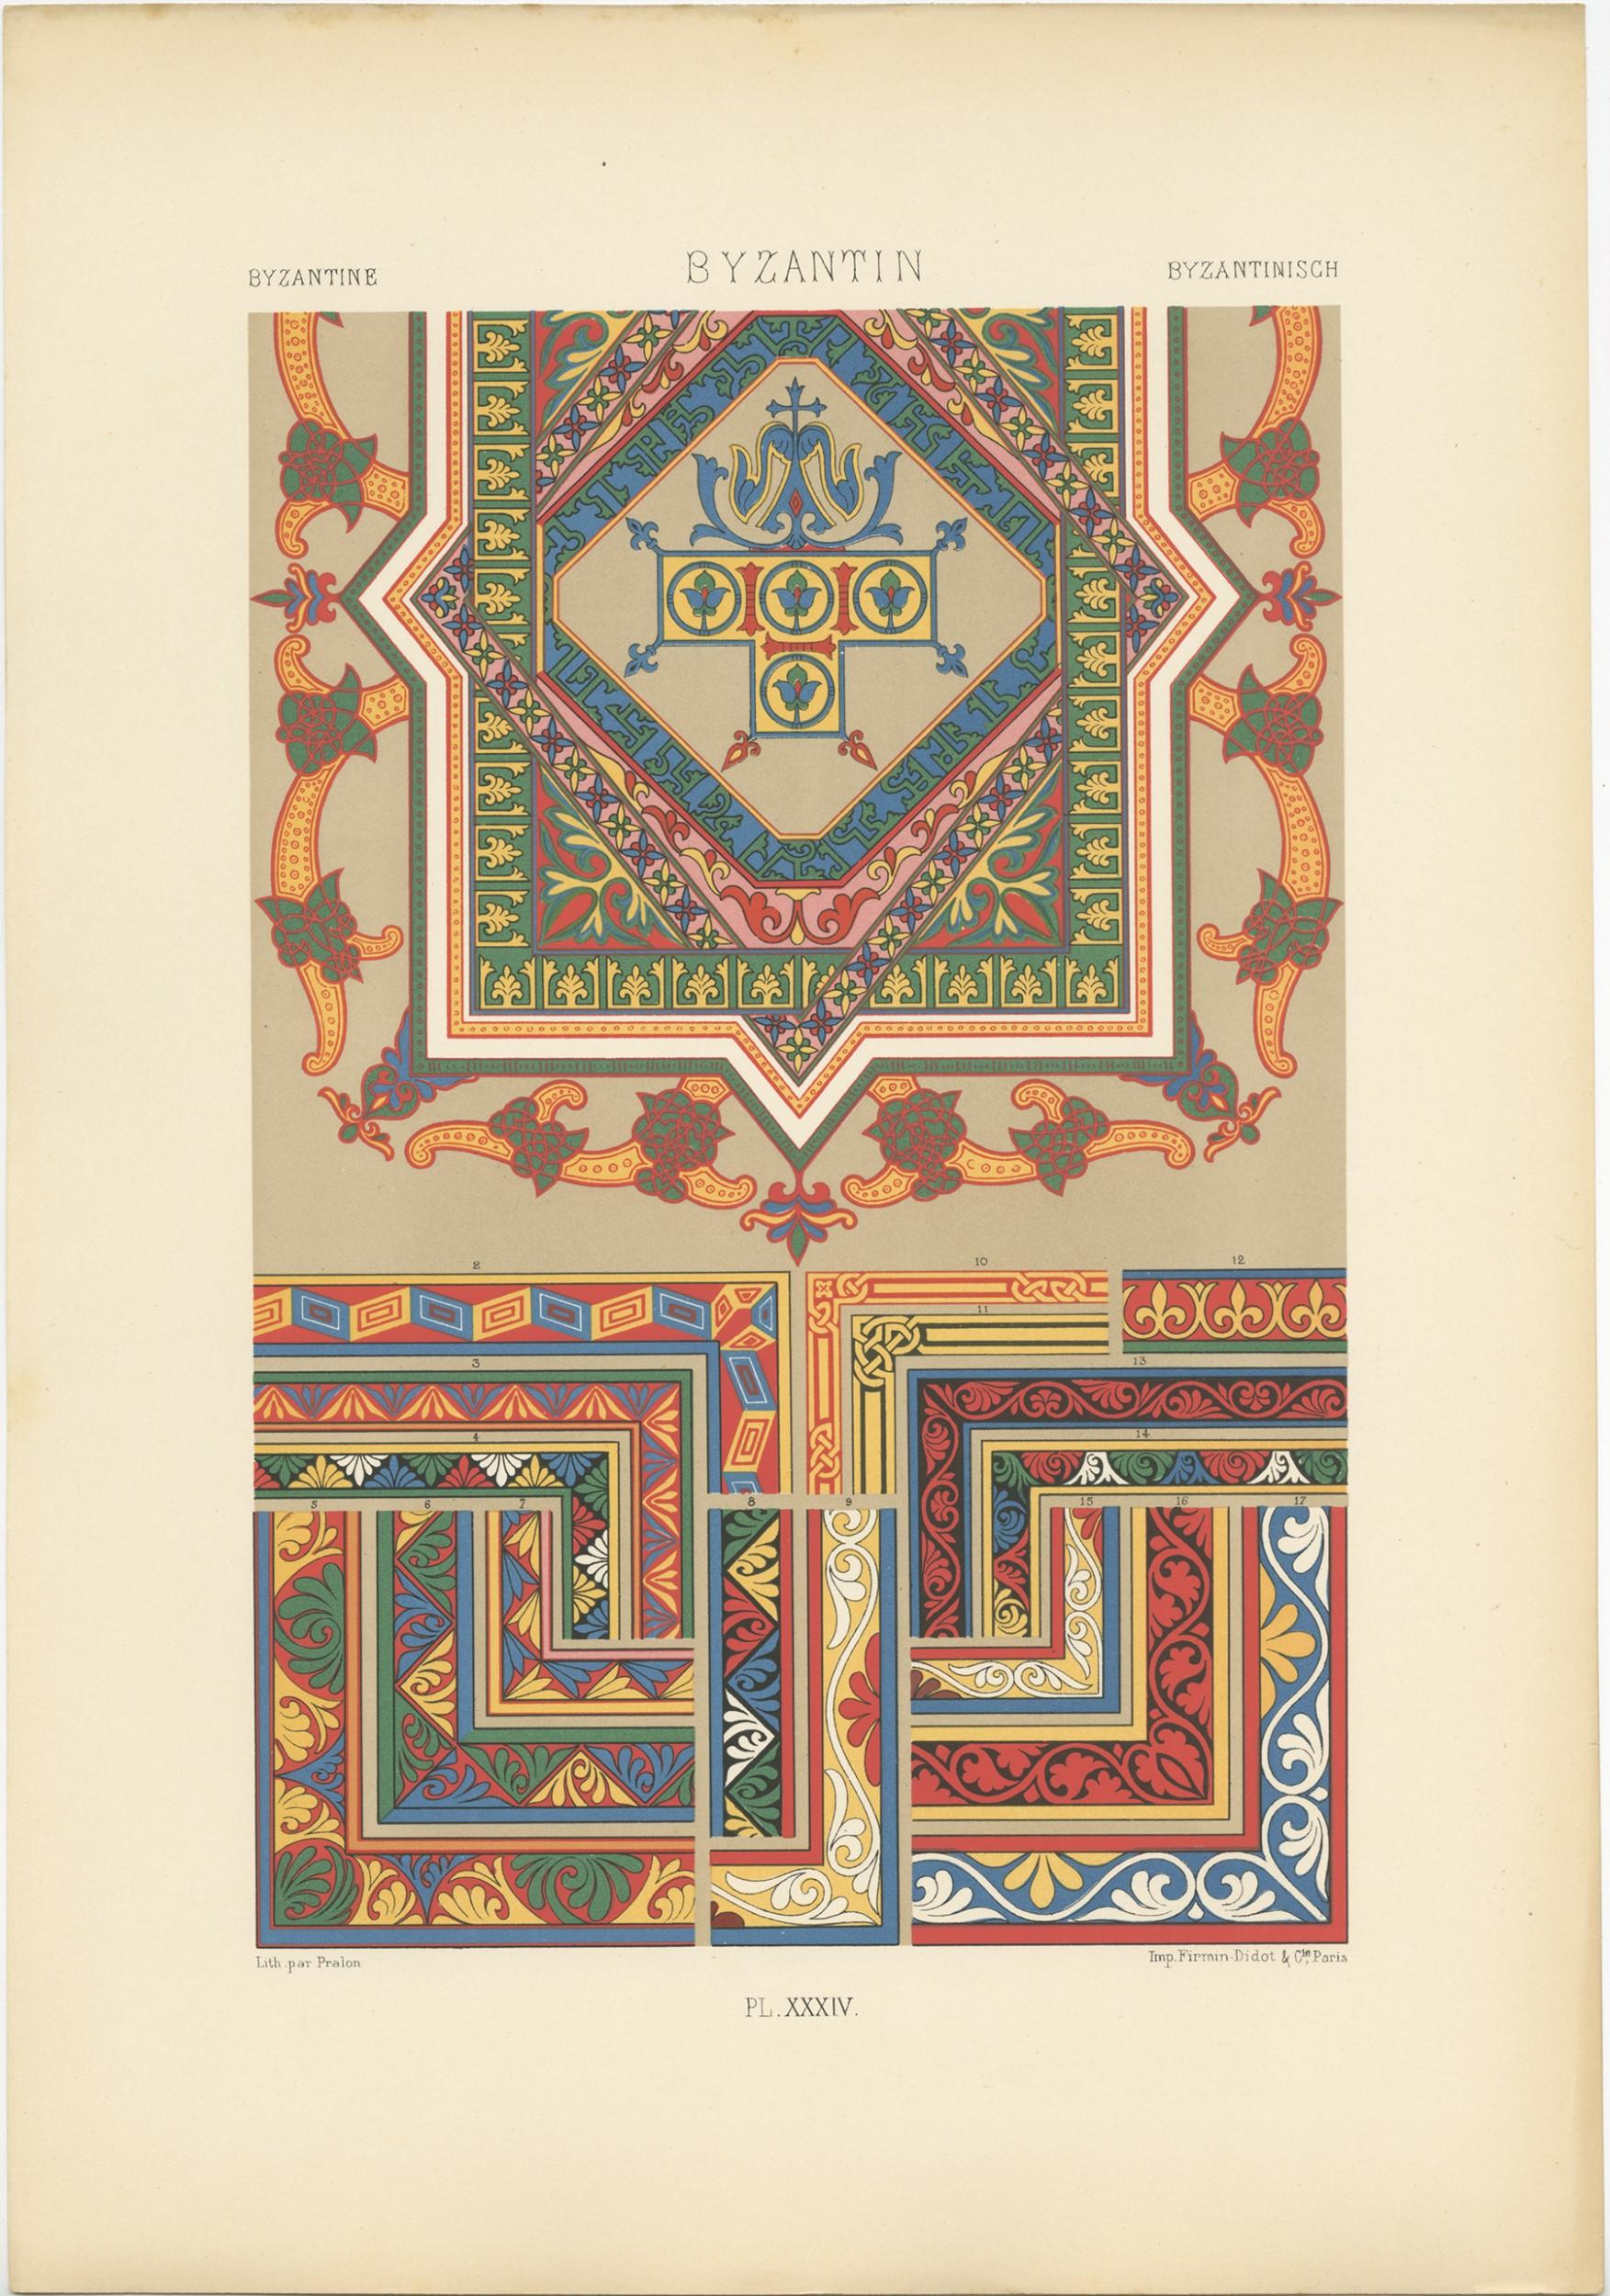 Antique print titled 'Byzantine - Byzantin - Byzantinisch'. Chromolithograph of Byzantine ornaments and decorative arts. This print originates from 'l'Ornement Polychrome' by Auguste Racinet. Published circa 1890.